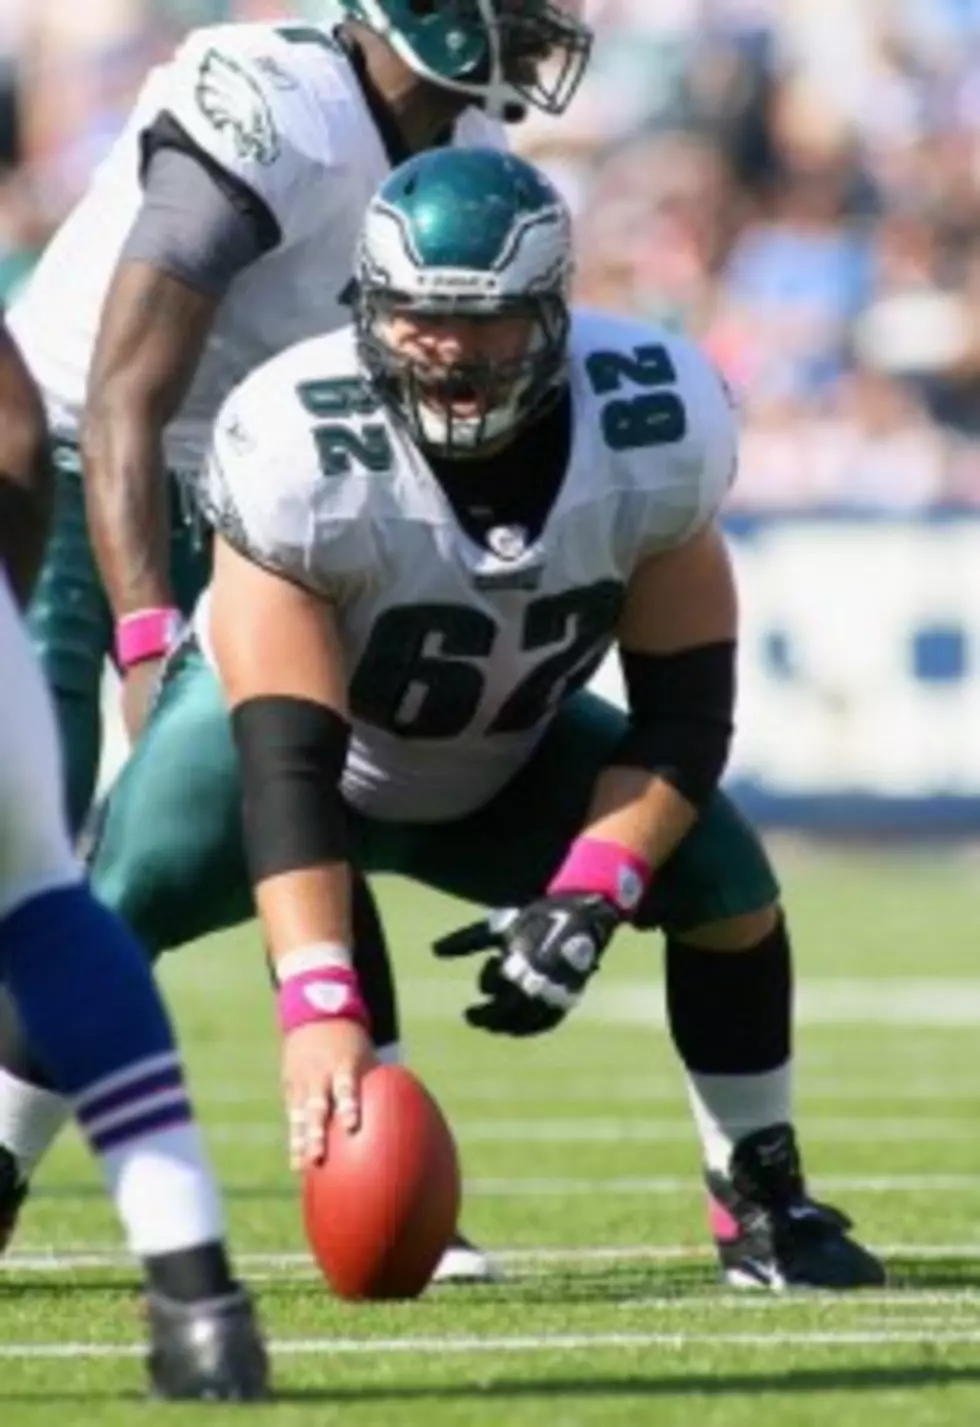 Eagles Re-Sign Center Jason Kelce to a Six-Year Extension